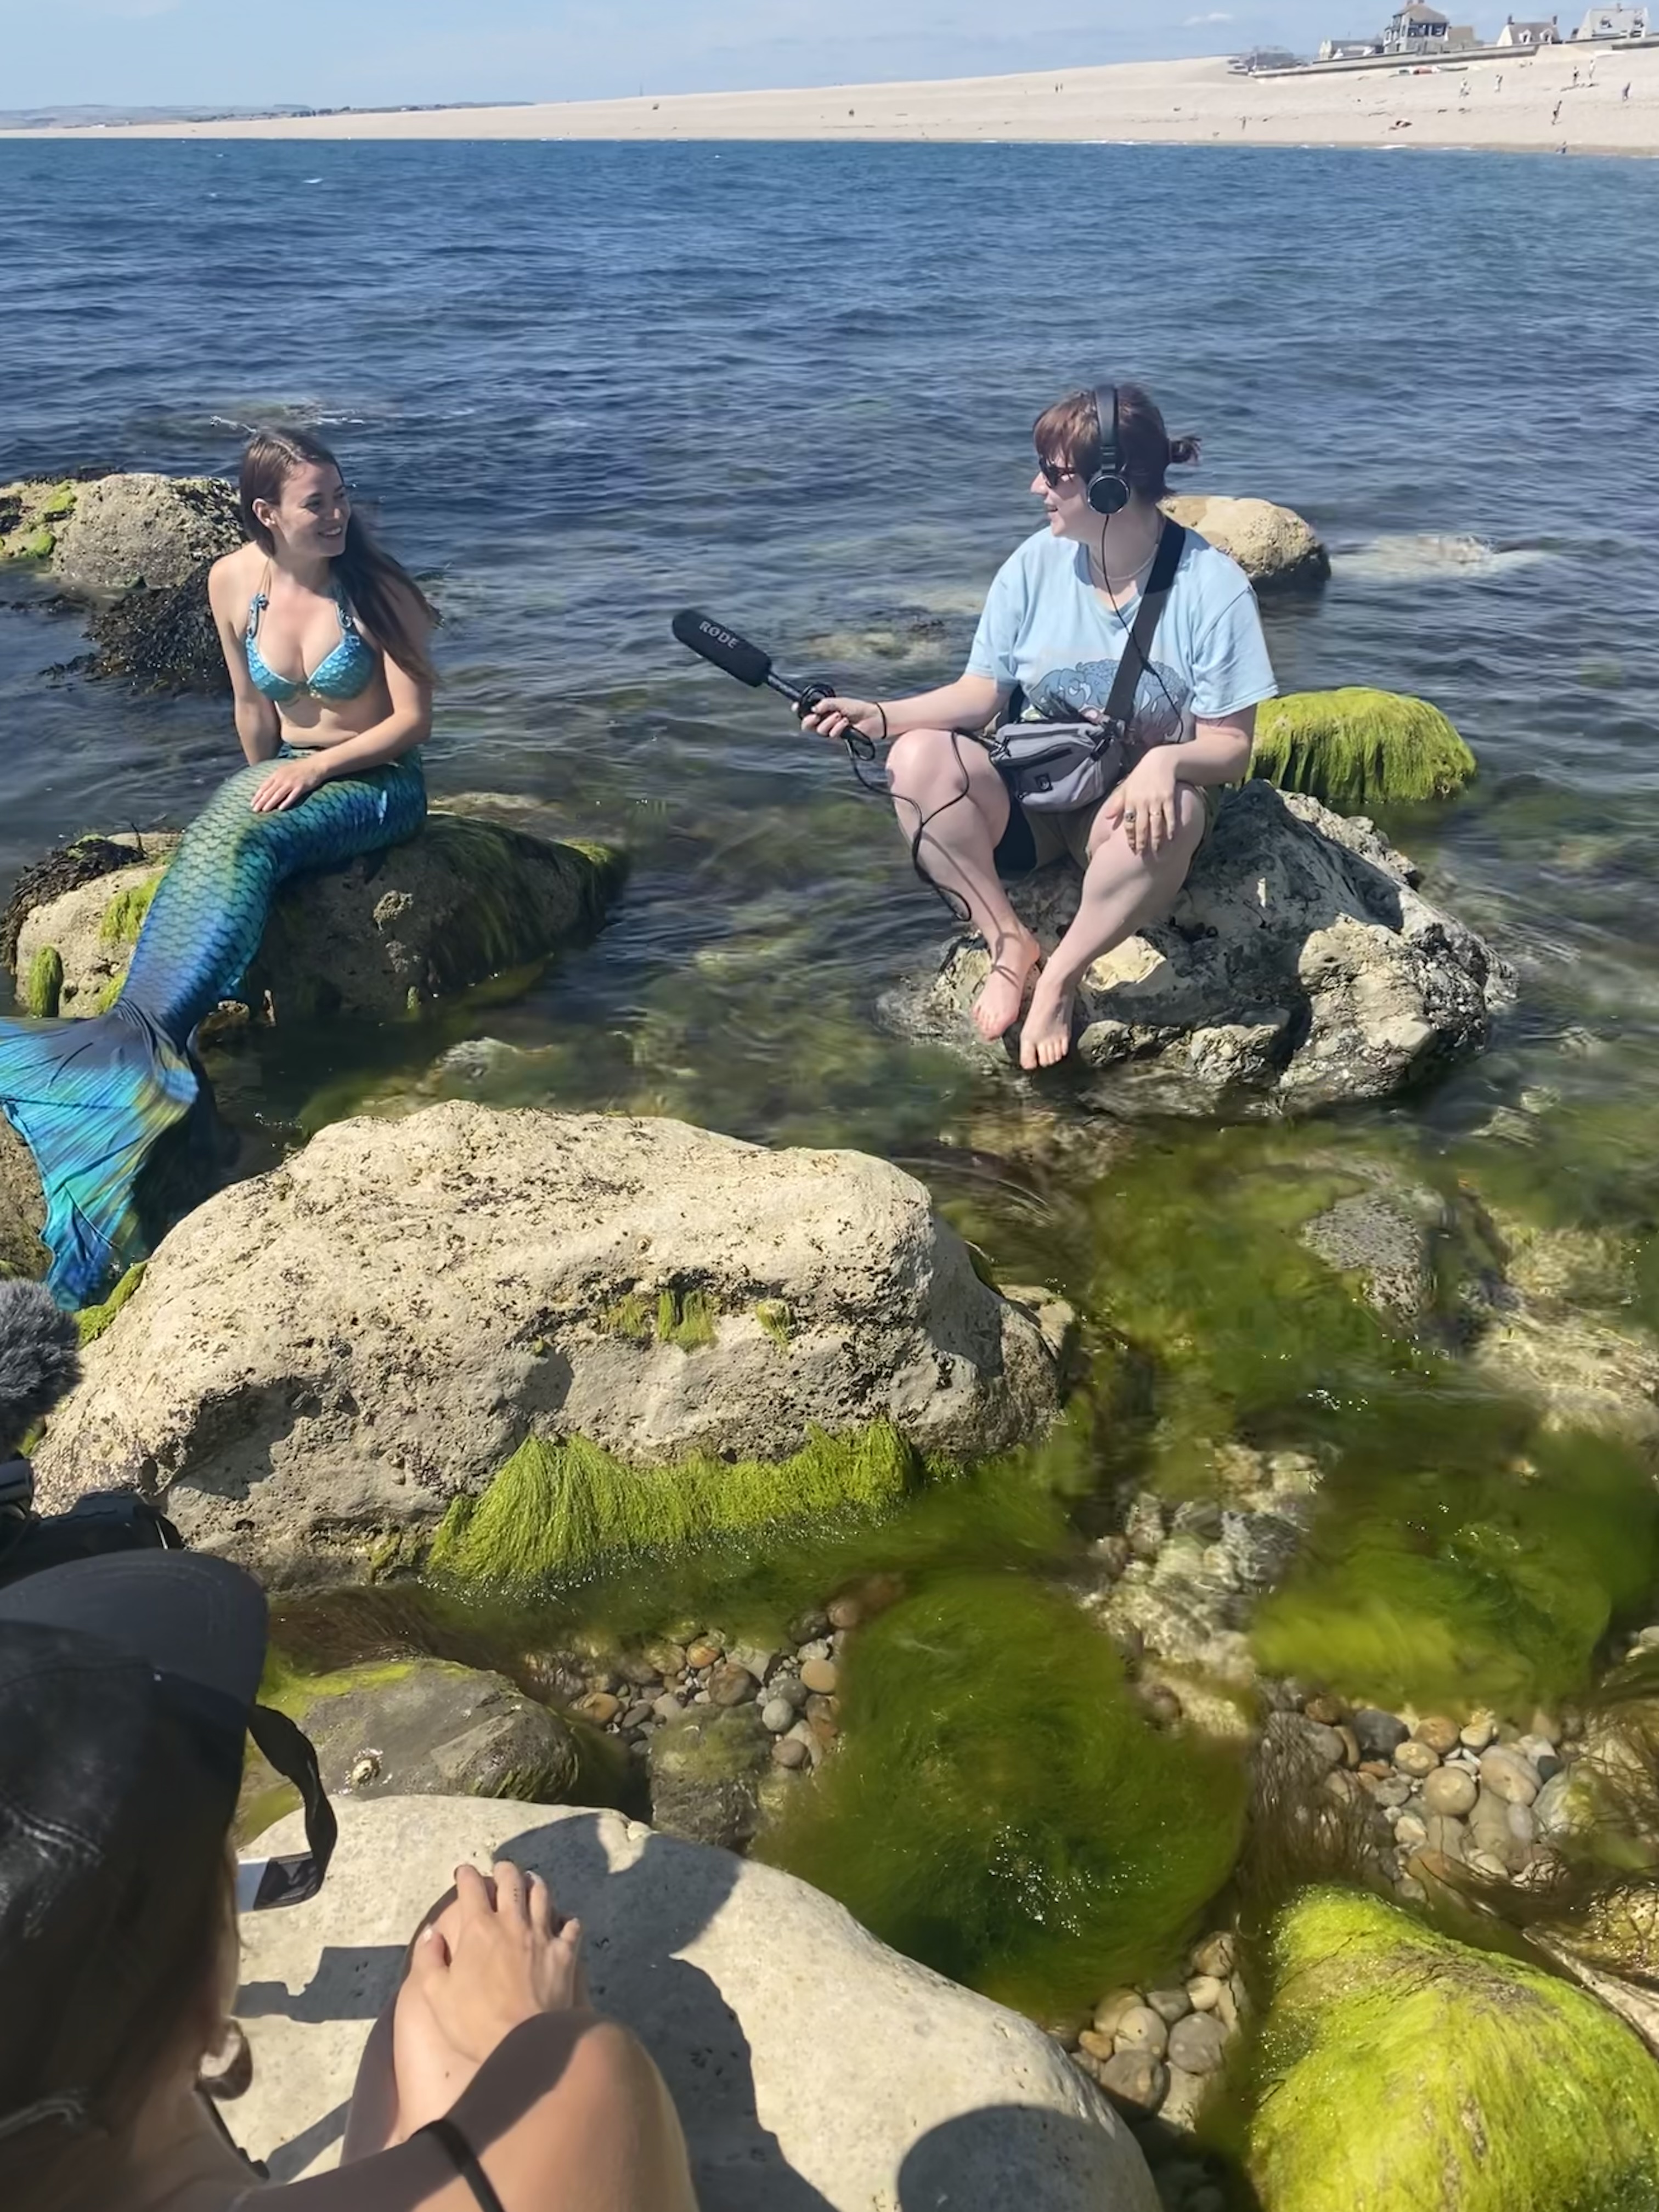 Kaia sits on a rock in full mermaid gear during her interview. The sound technician is next to her holding out a boom mic.